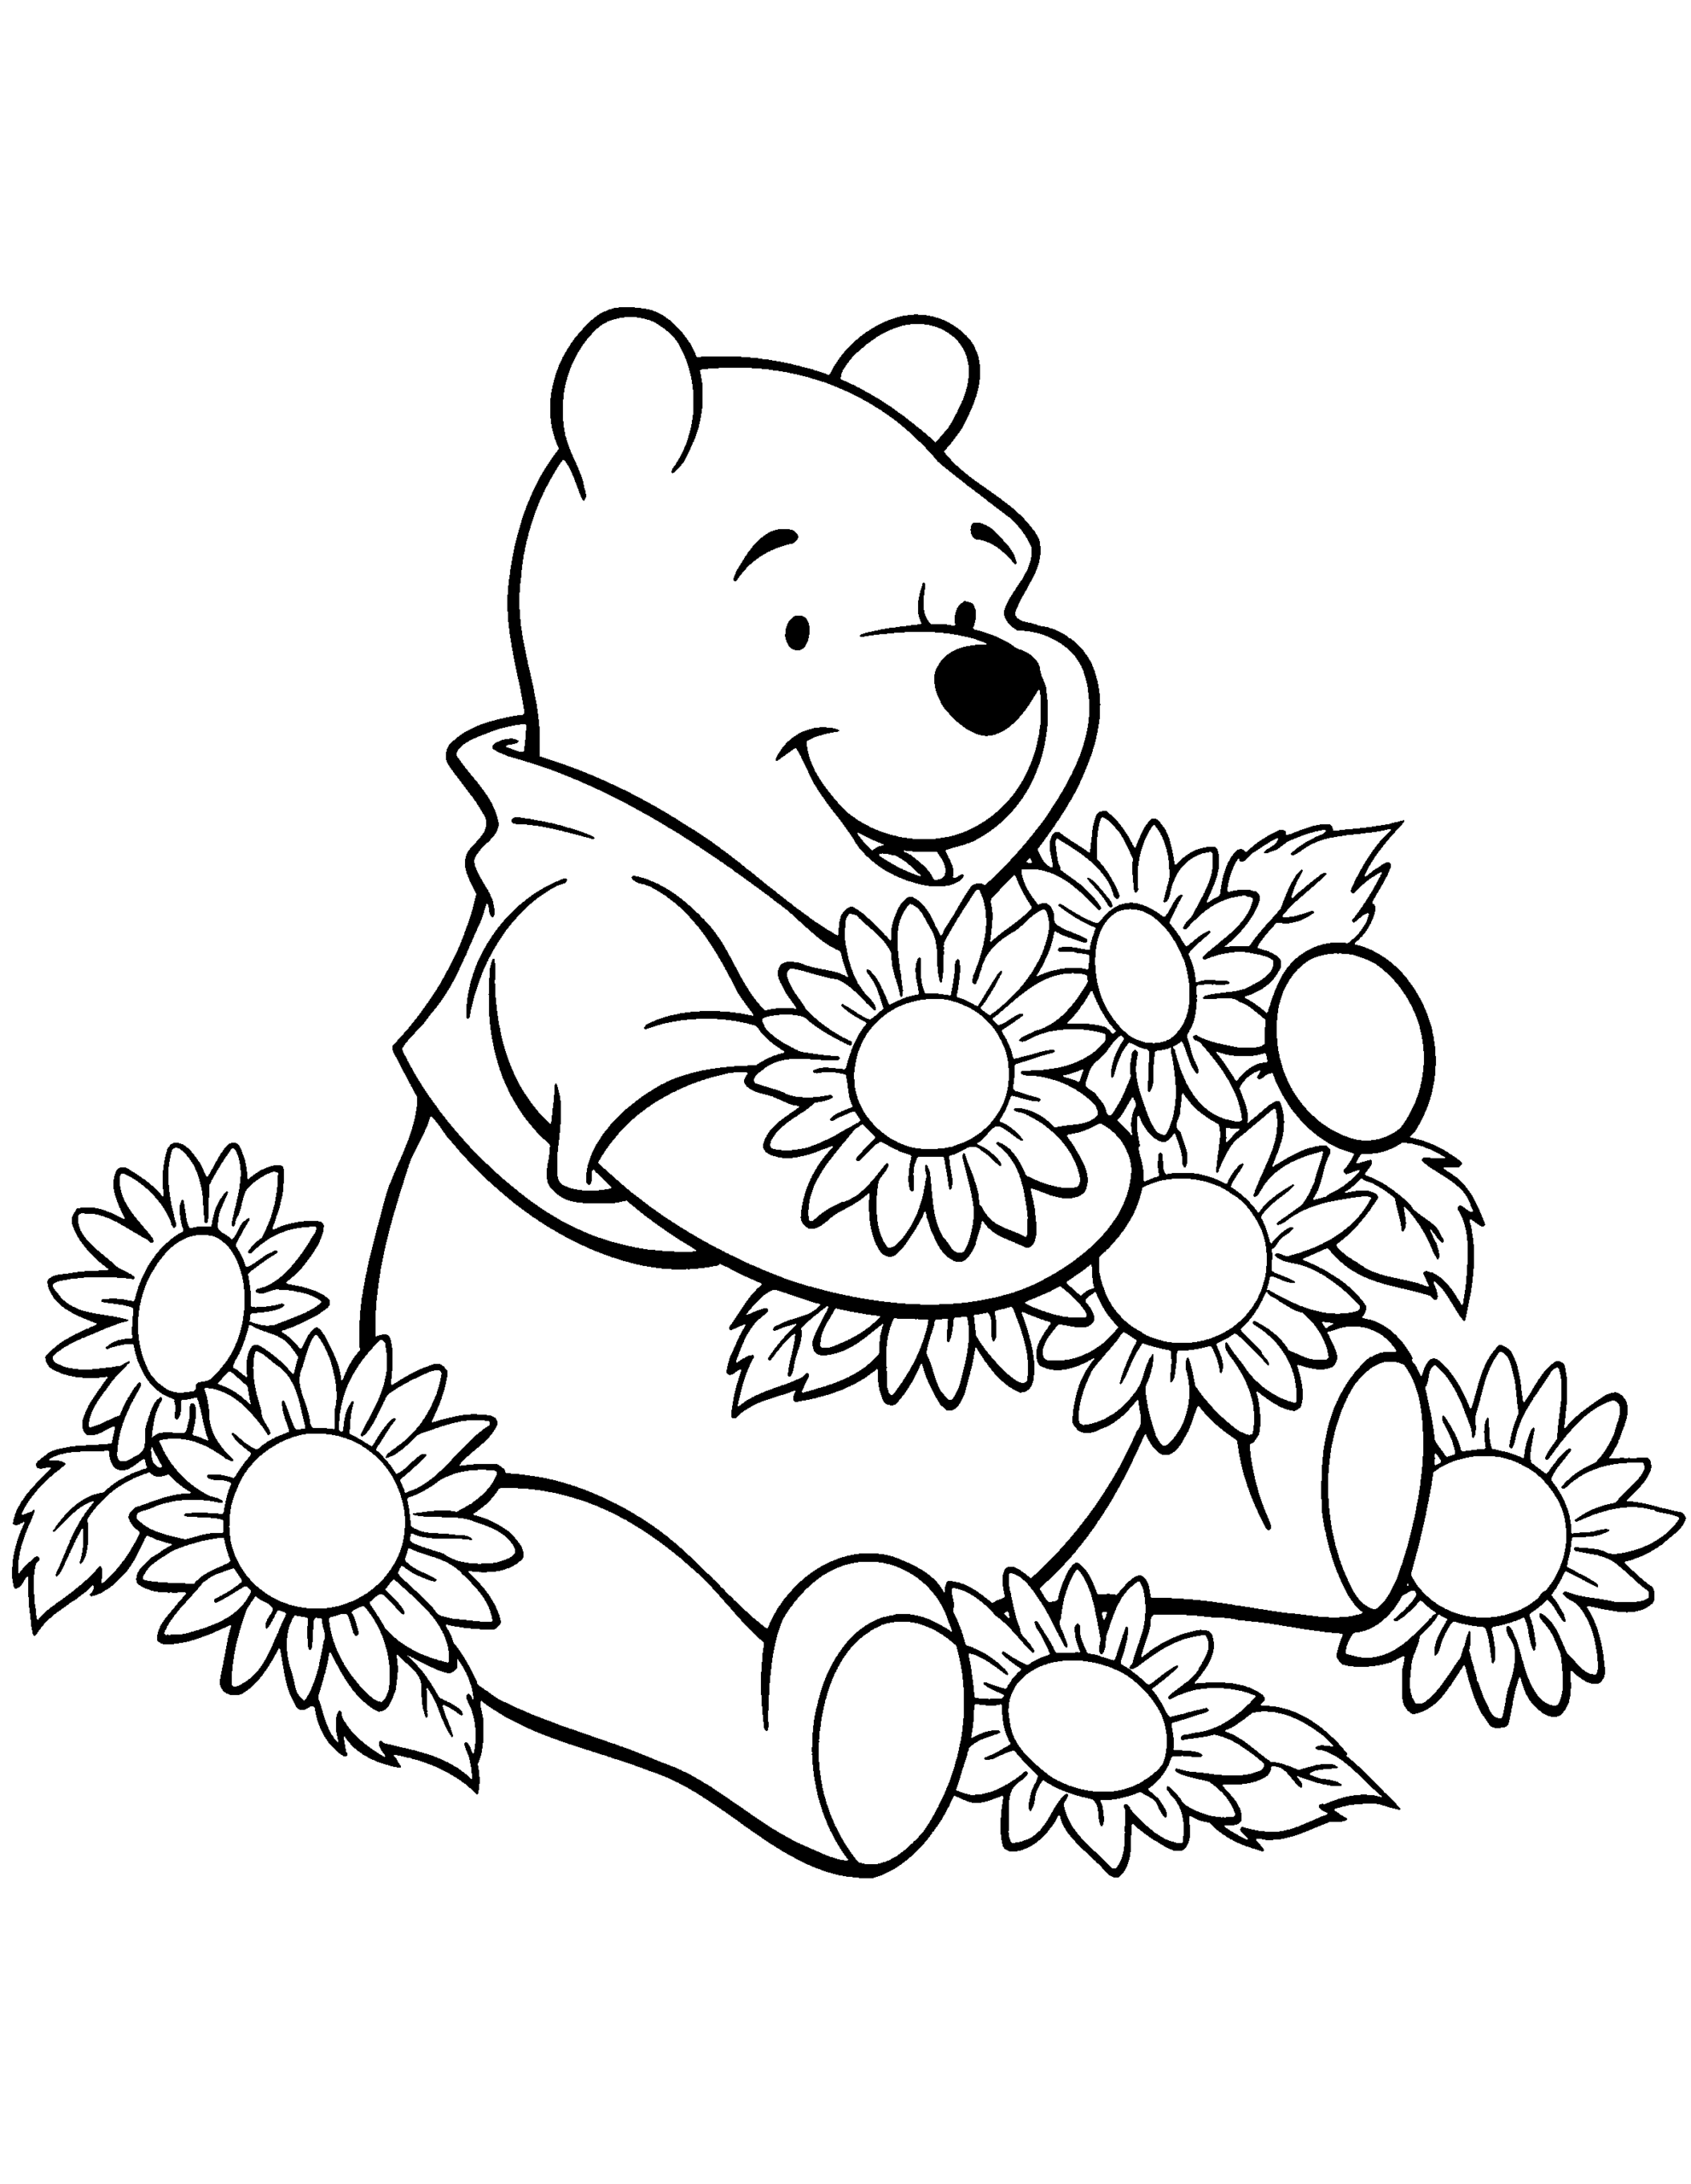 Winnie the Pooh Coloring Pages Cartoons winnie the pooh 117 Printable 2020 7097 Coloring4free